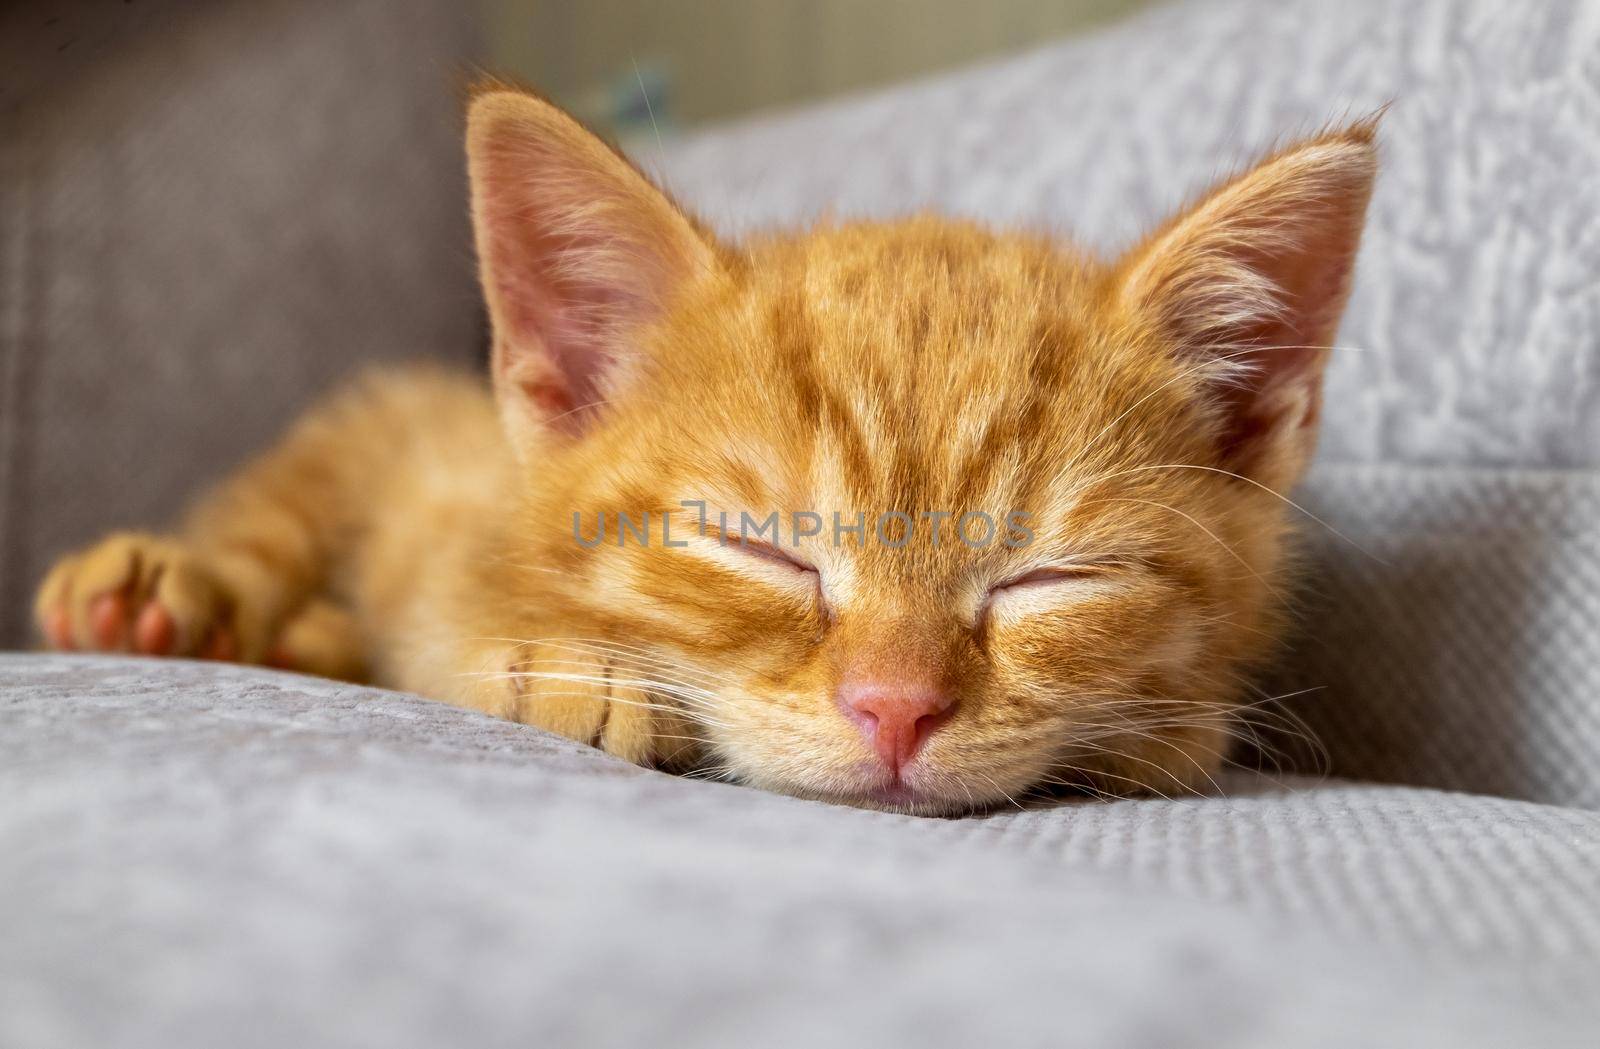 The little ginger kitten is tired and sleeps on the couch. Pets, pet care concept. Selective focus.